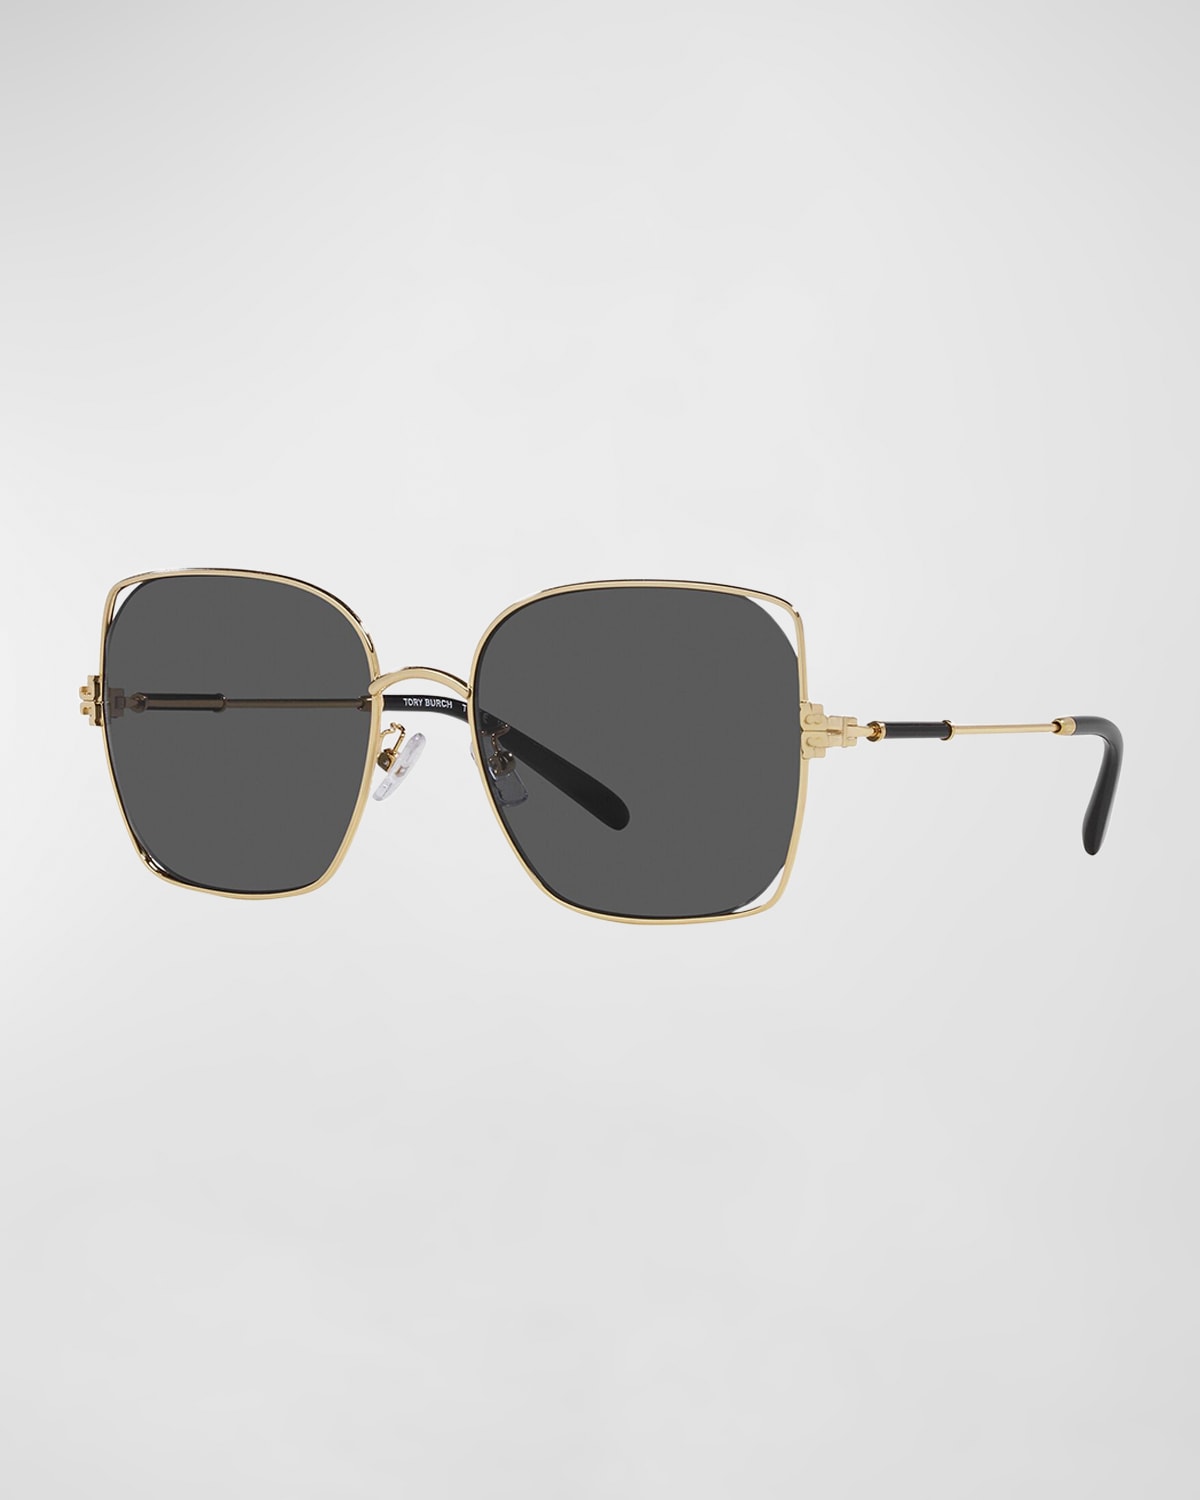 Tory Burch Twisted Square Metal Sunglasses | Neiman Marcus